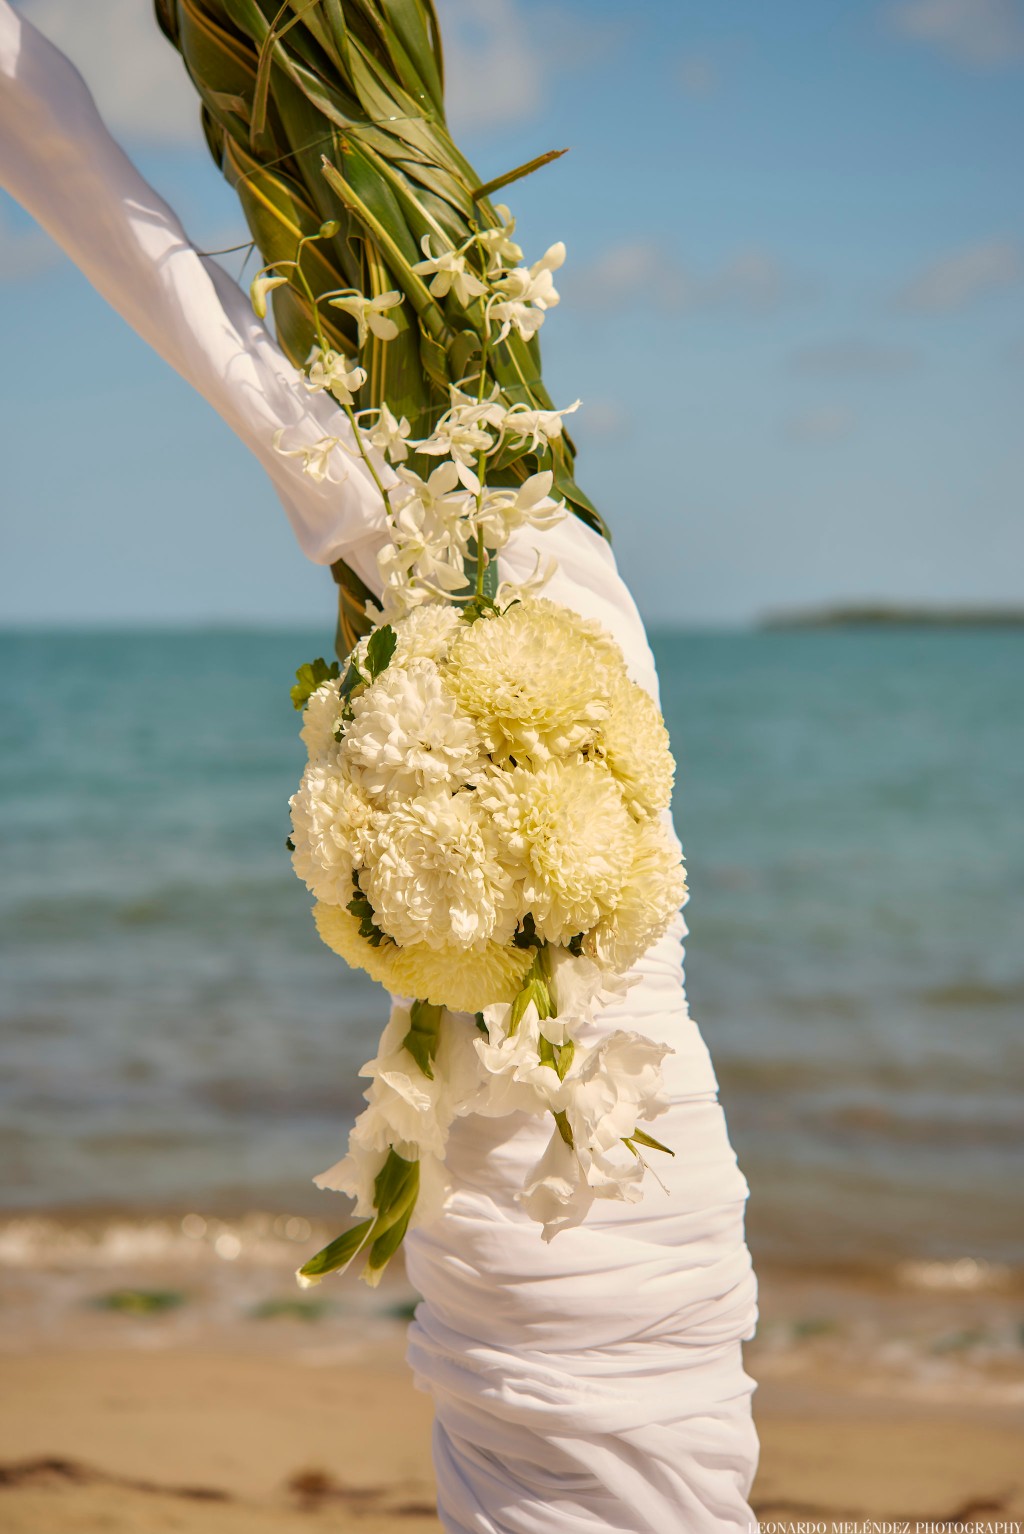 A Stunning, Intimate Elopement in Placencia, Belize